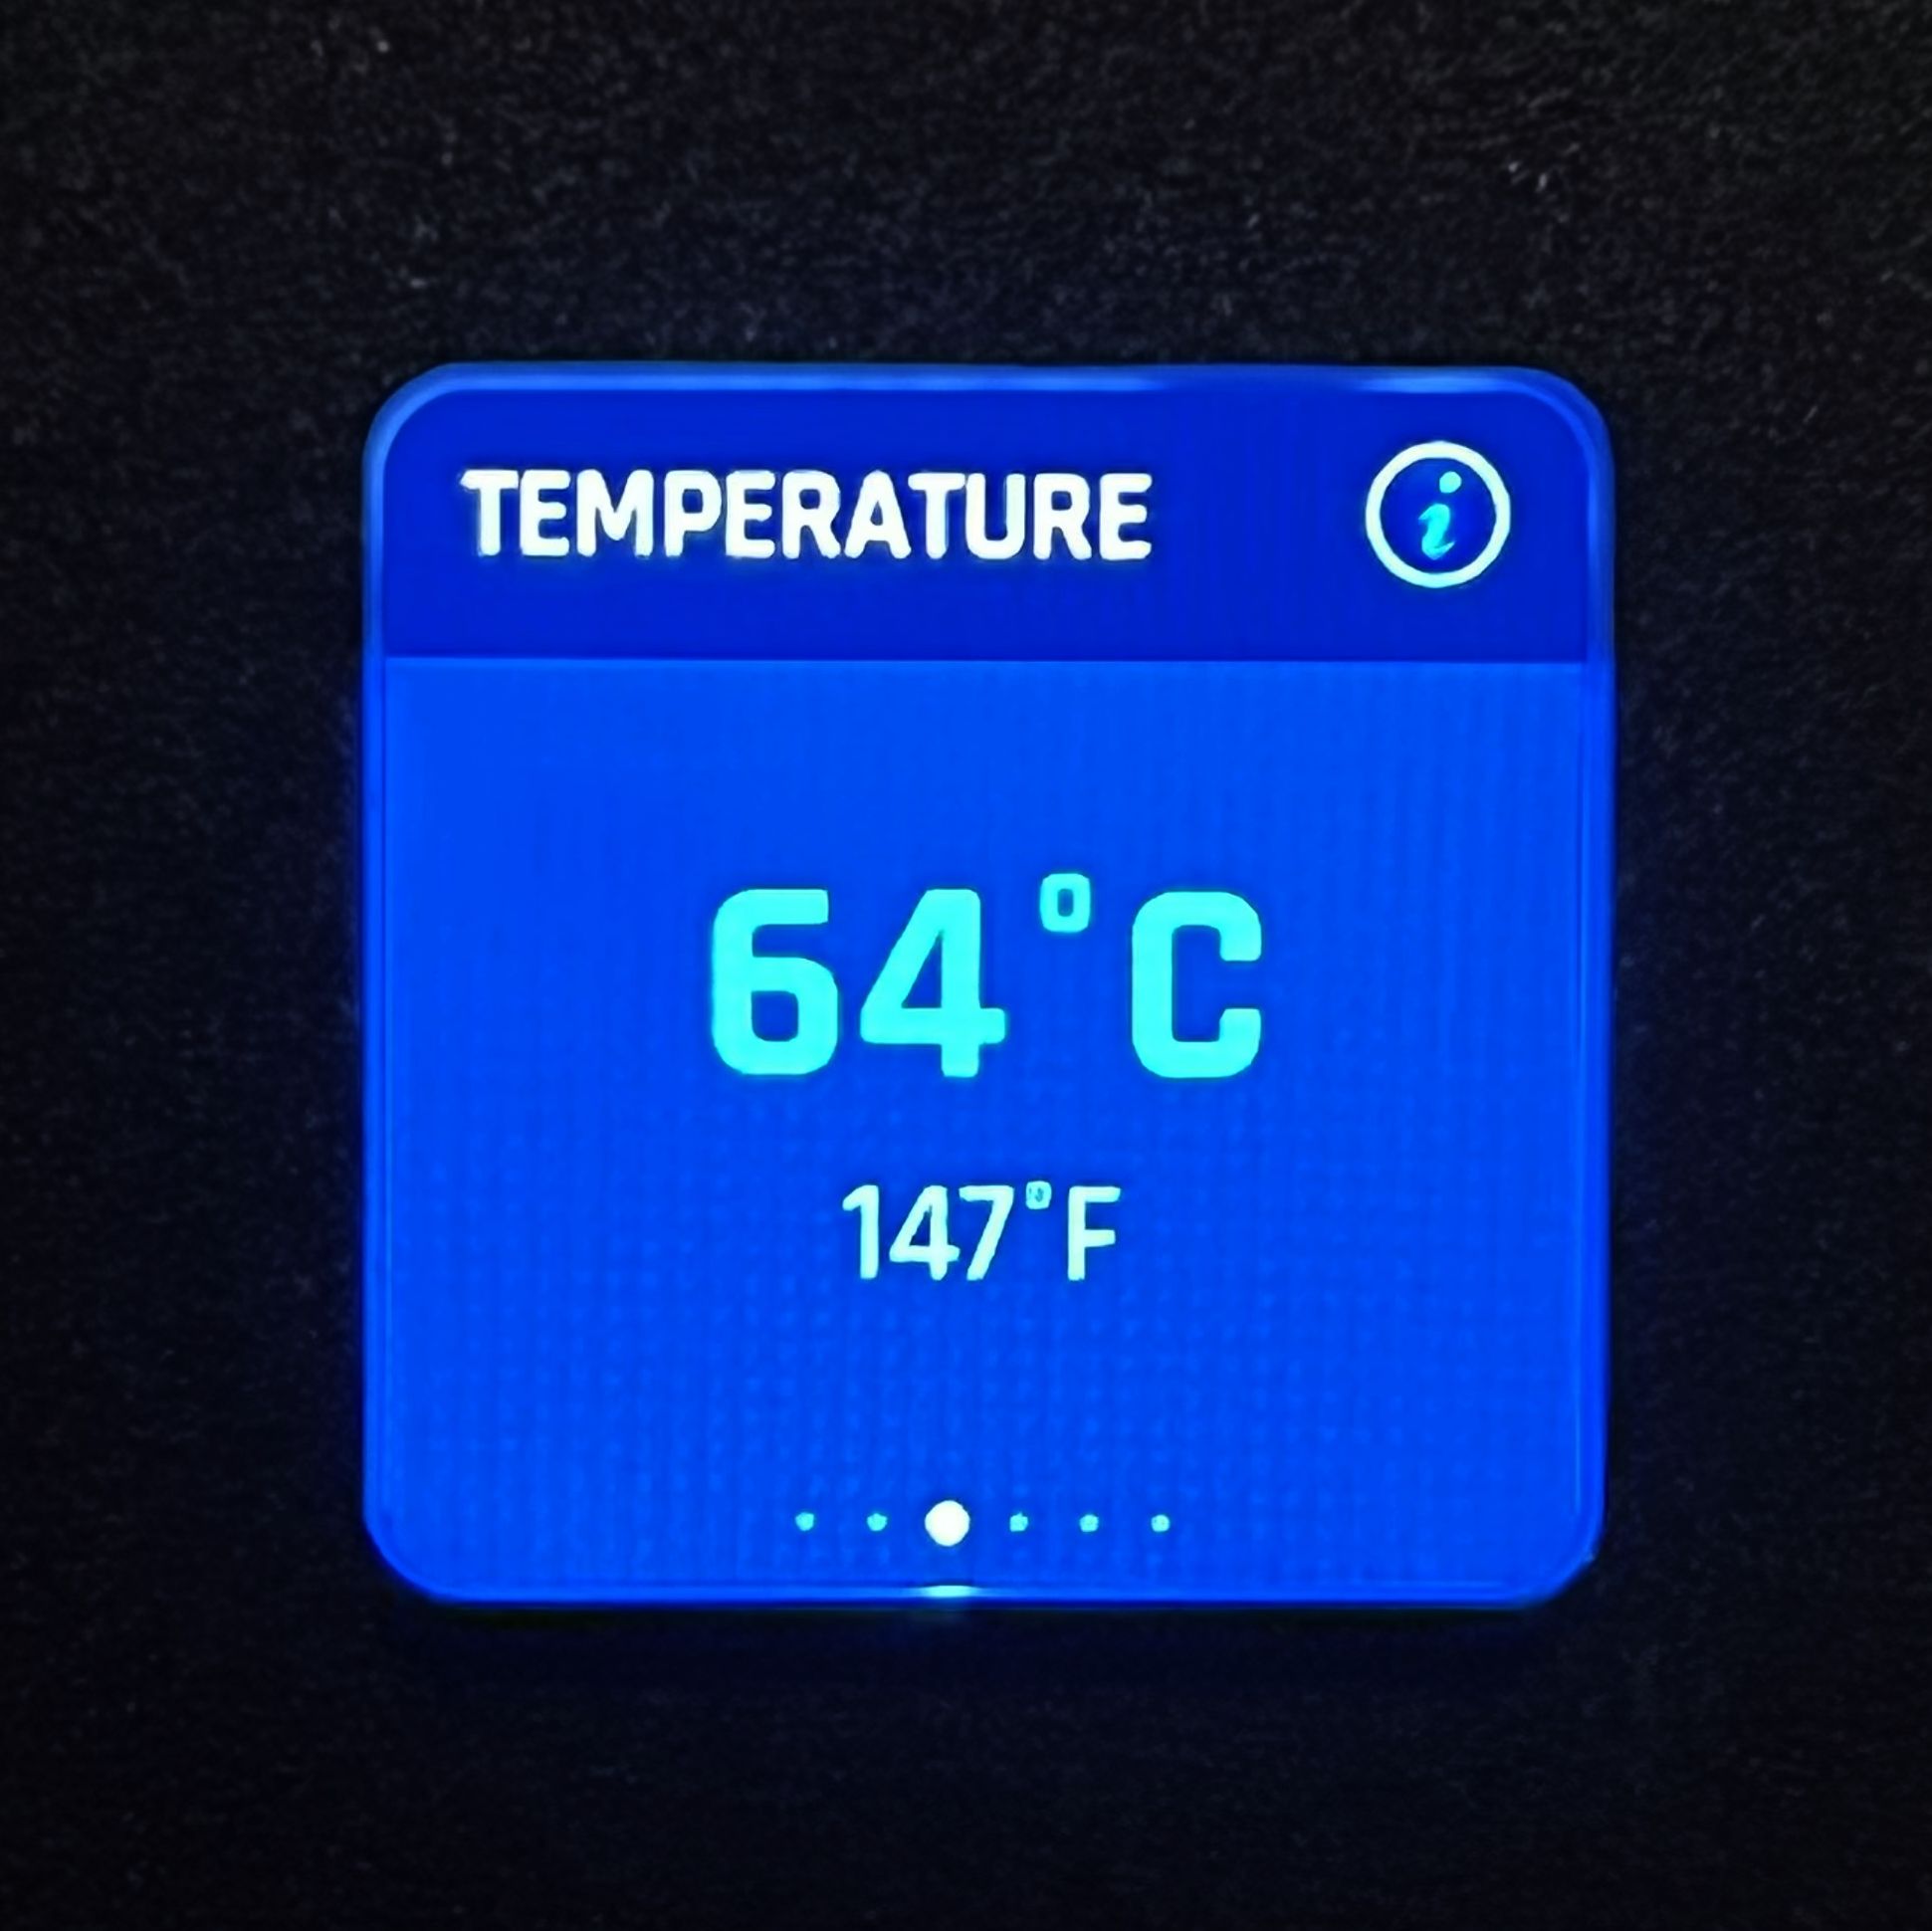 Dream Wall showing temperature on display